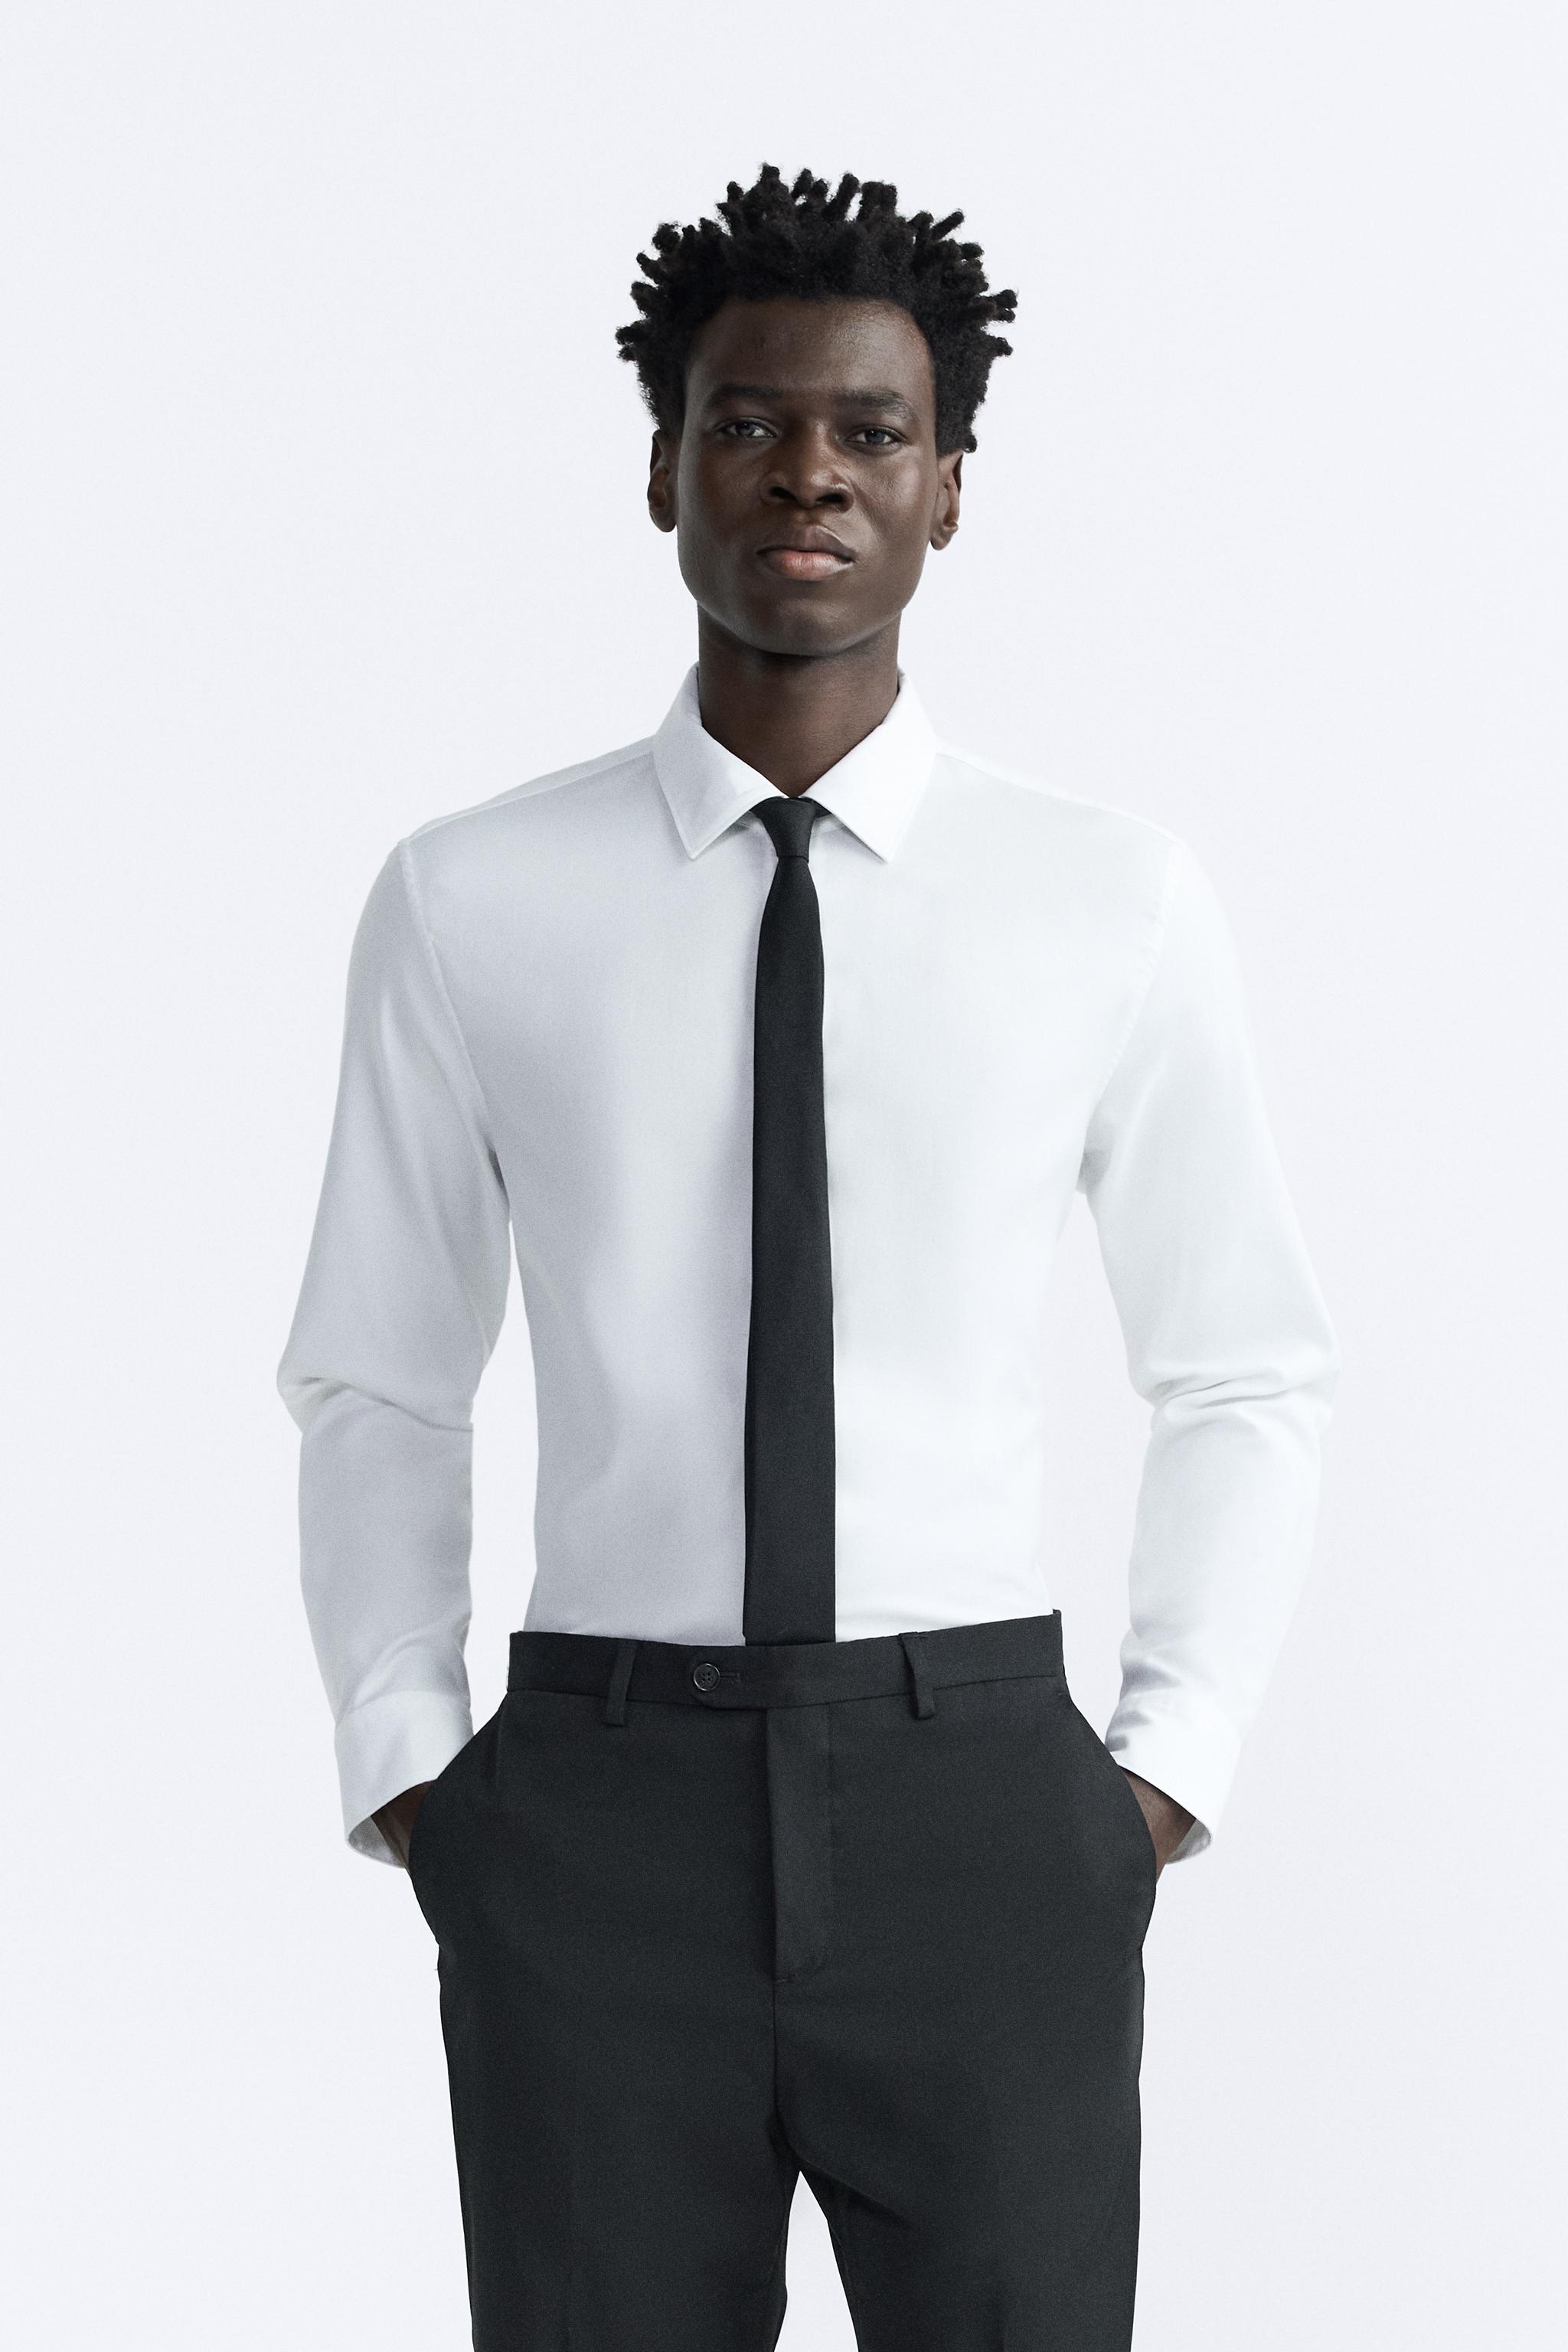 Newfacelook Mens Double Collar Shirts Casual Slim Fit Dress Shirt White M  at  Men's Clothing store